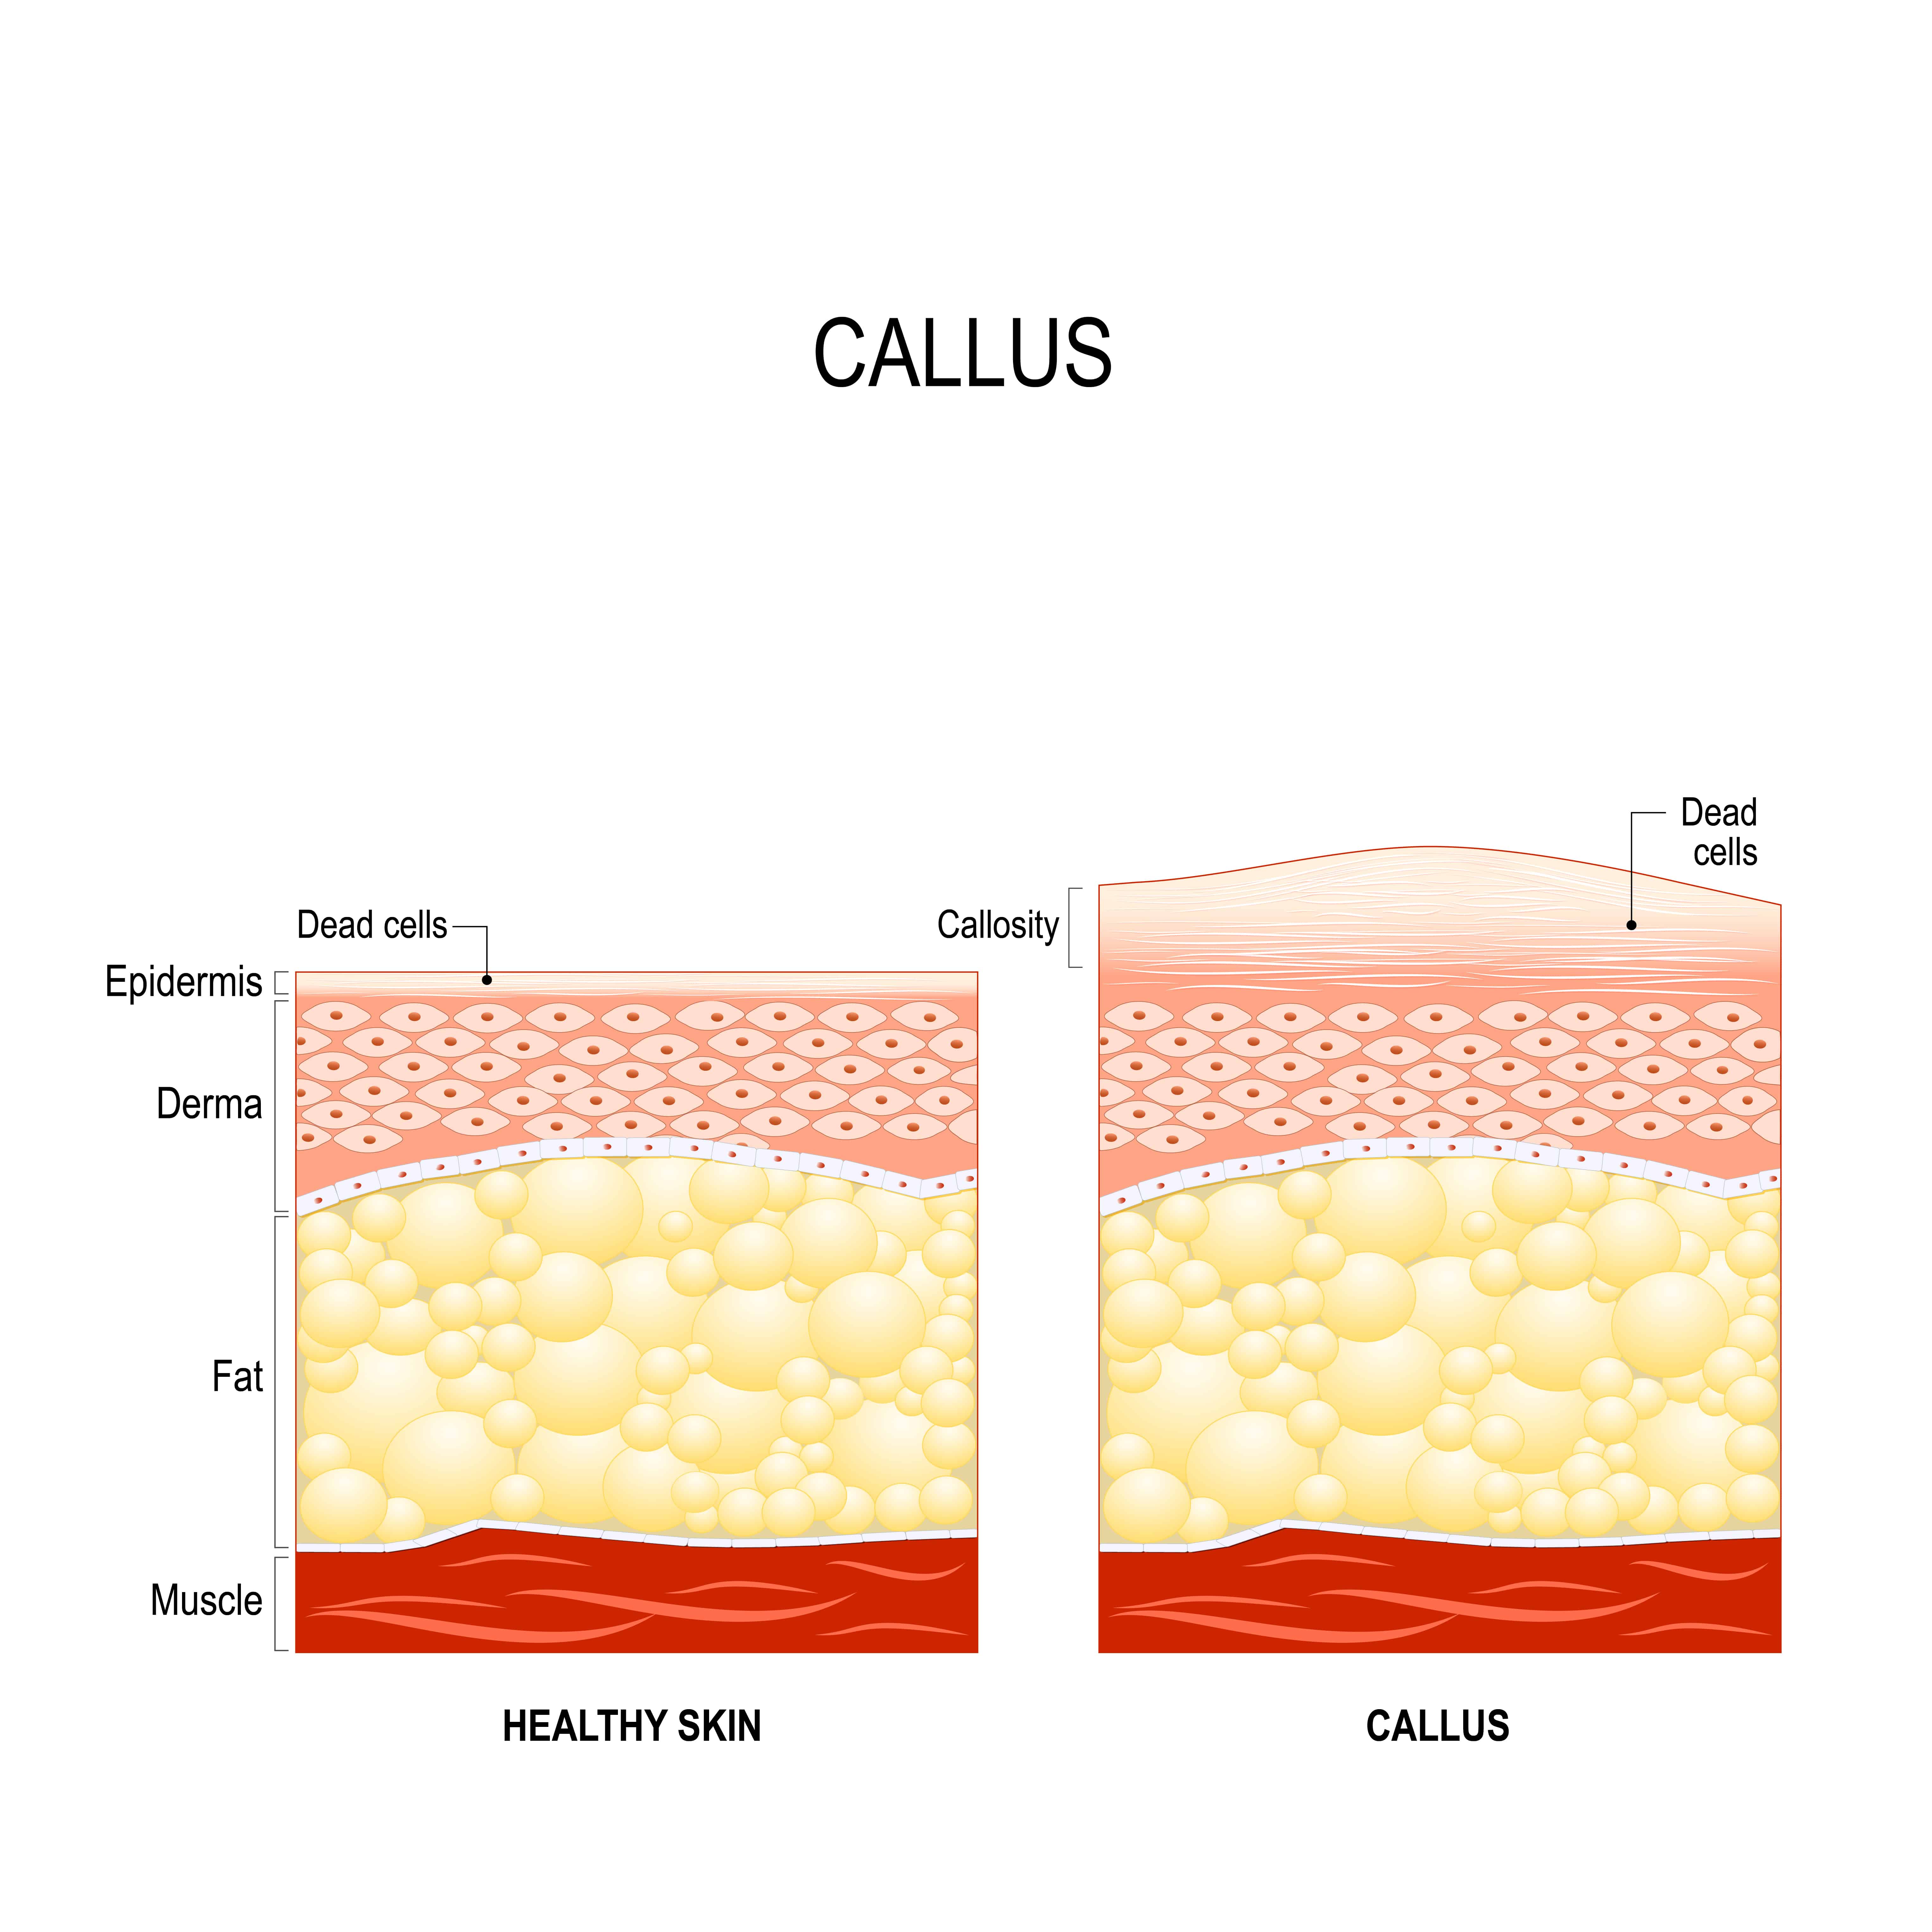 Essential Oils For Calluses: When You’re Tired Of Corns, Blisters, And Calluses Essential Oil Benefits